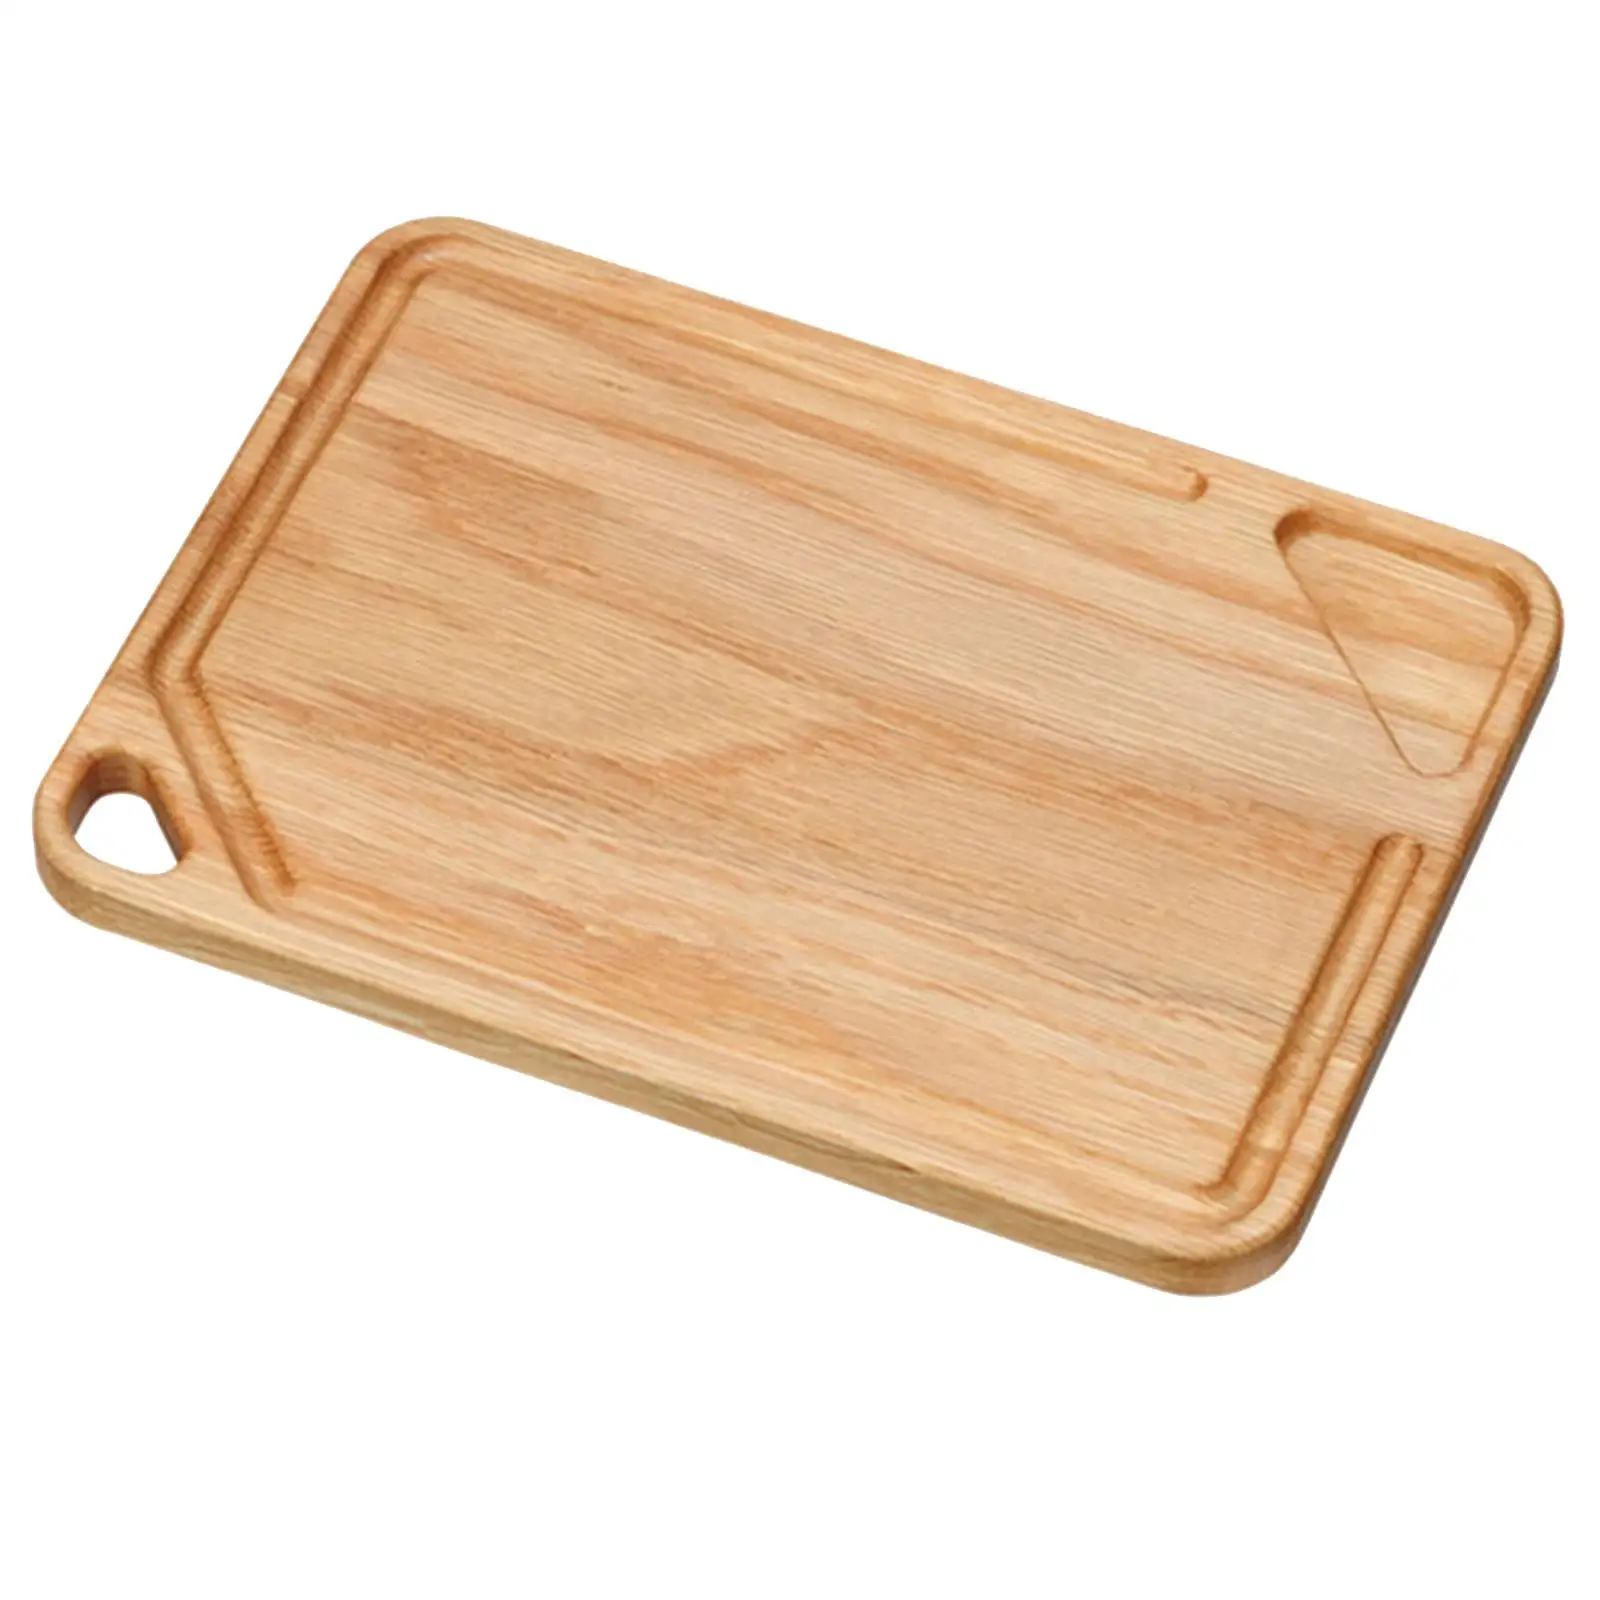 Wood Chopping Board Kitchen Baking Tools Platter Japanese Wooden Tray Pizza Board for Steak Meat Vegetables Cheese